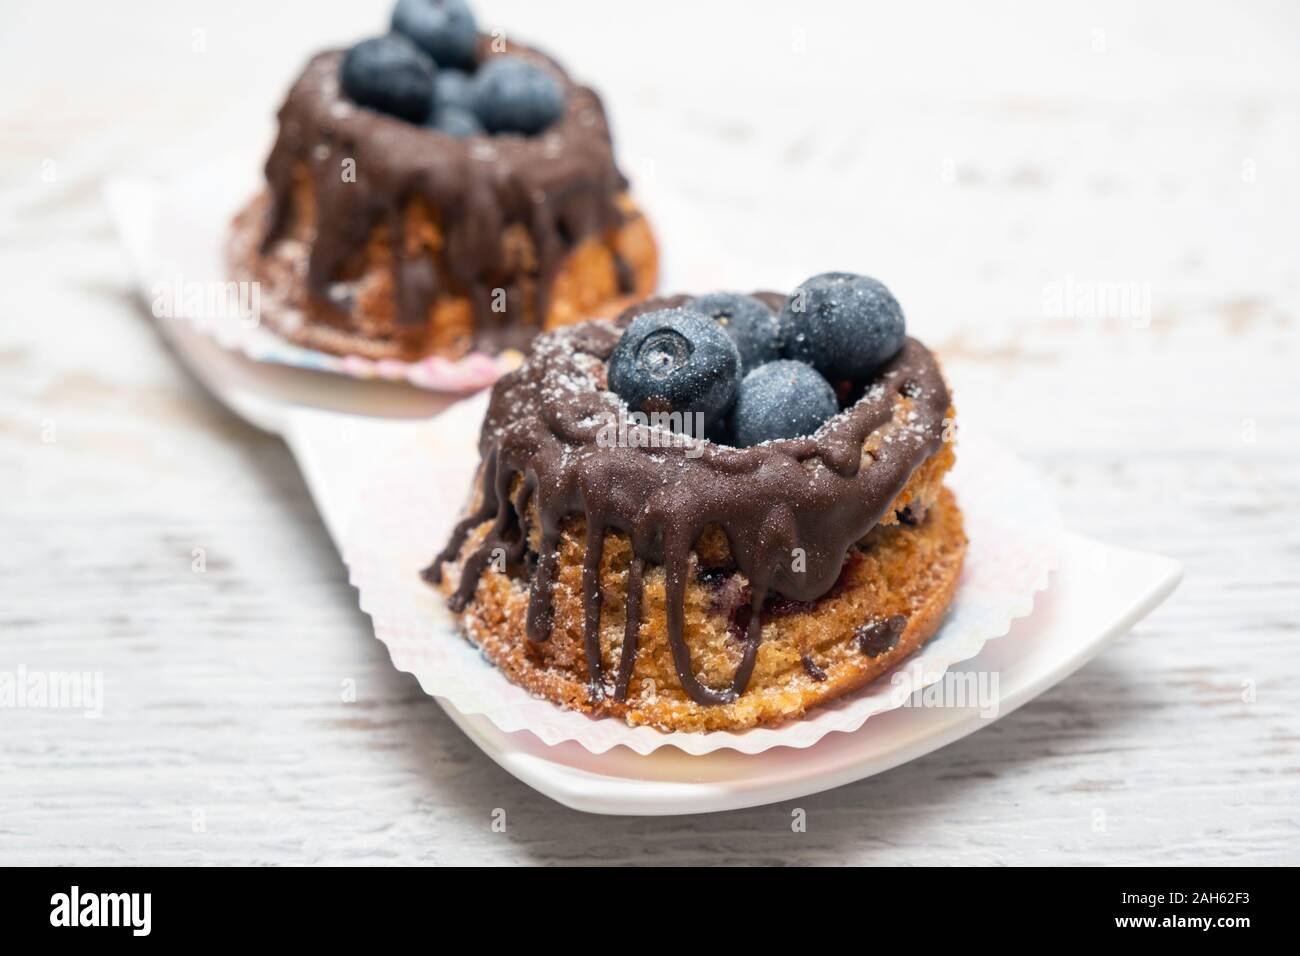 Freshly baked blueberry muffins with chocolate topping Stock Photo